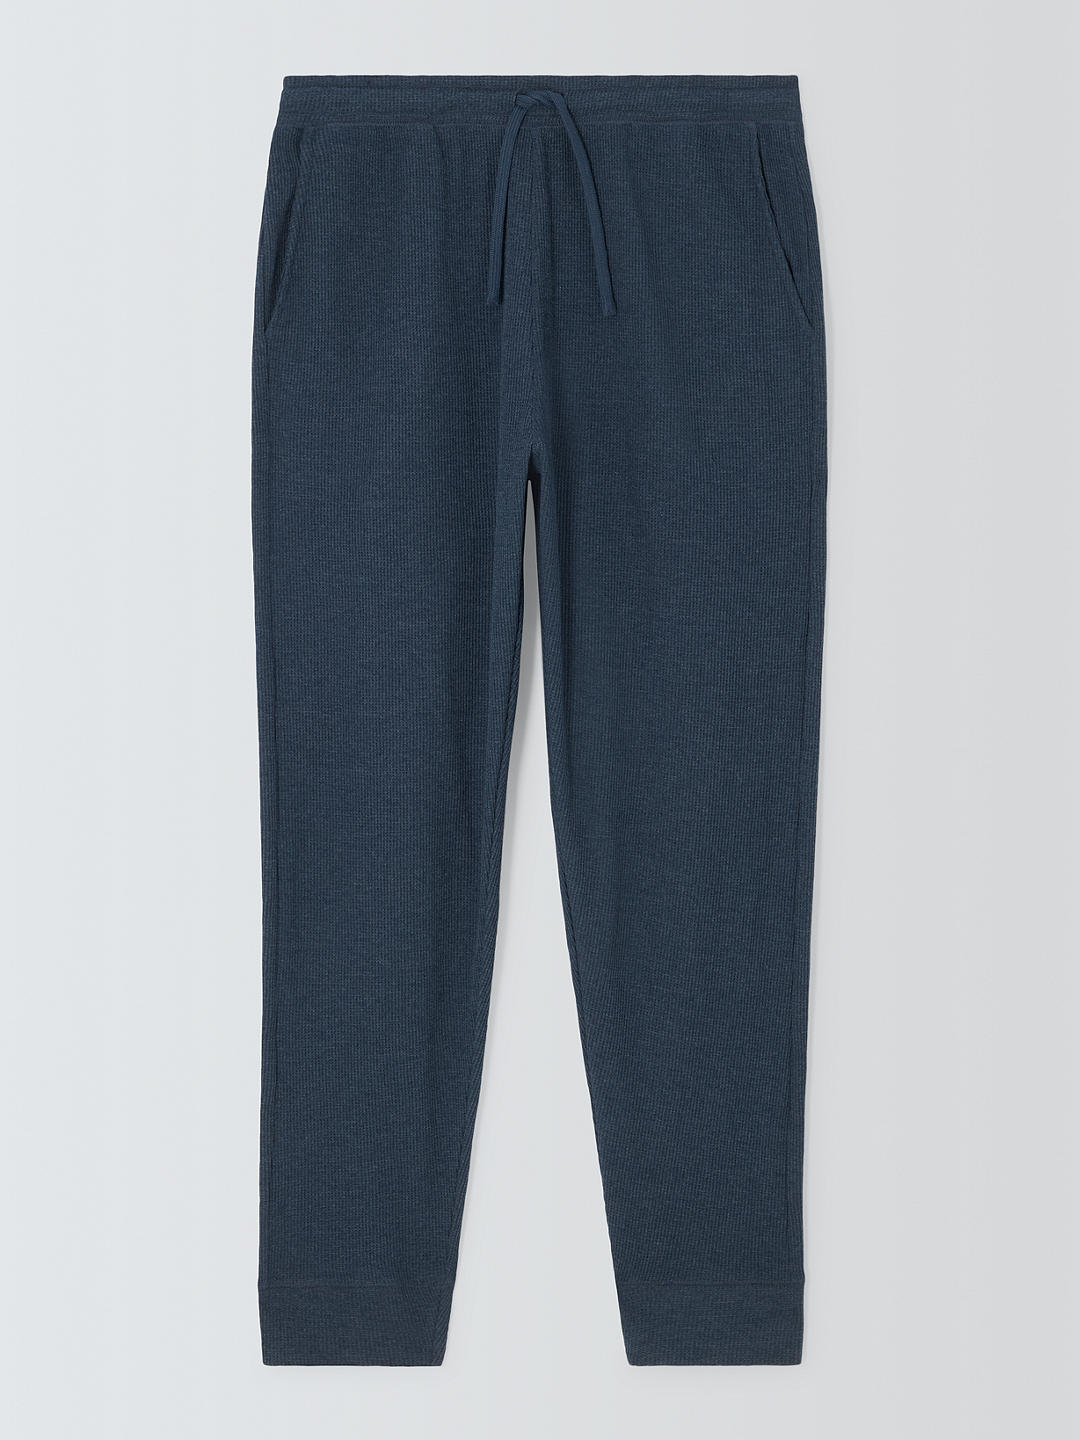 John Lewis ANYDAY Waffle Cotton Blend Lounge Joggers, Navy